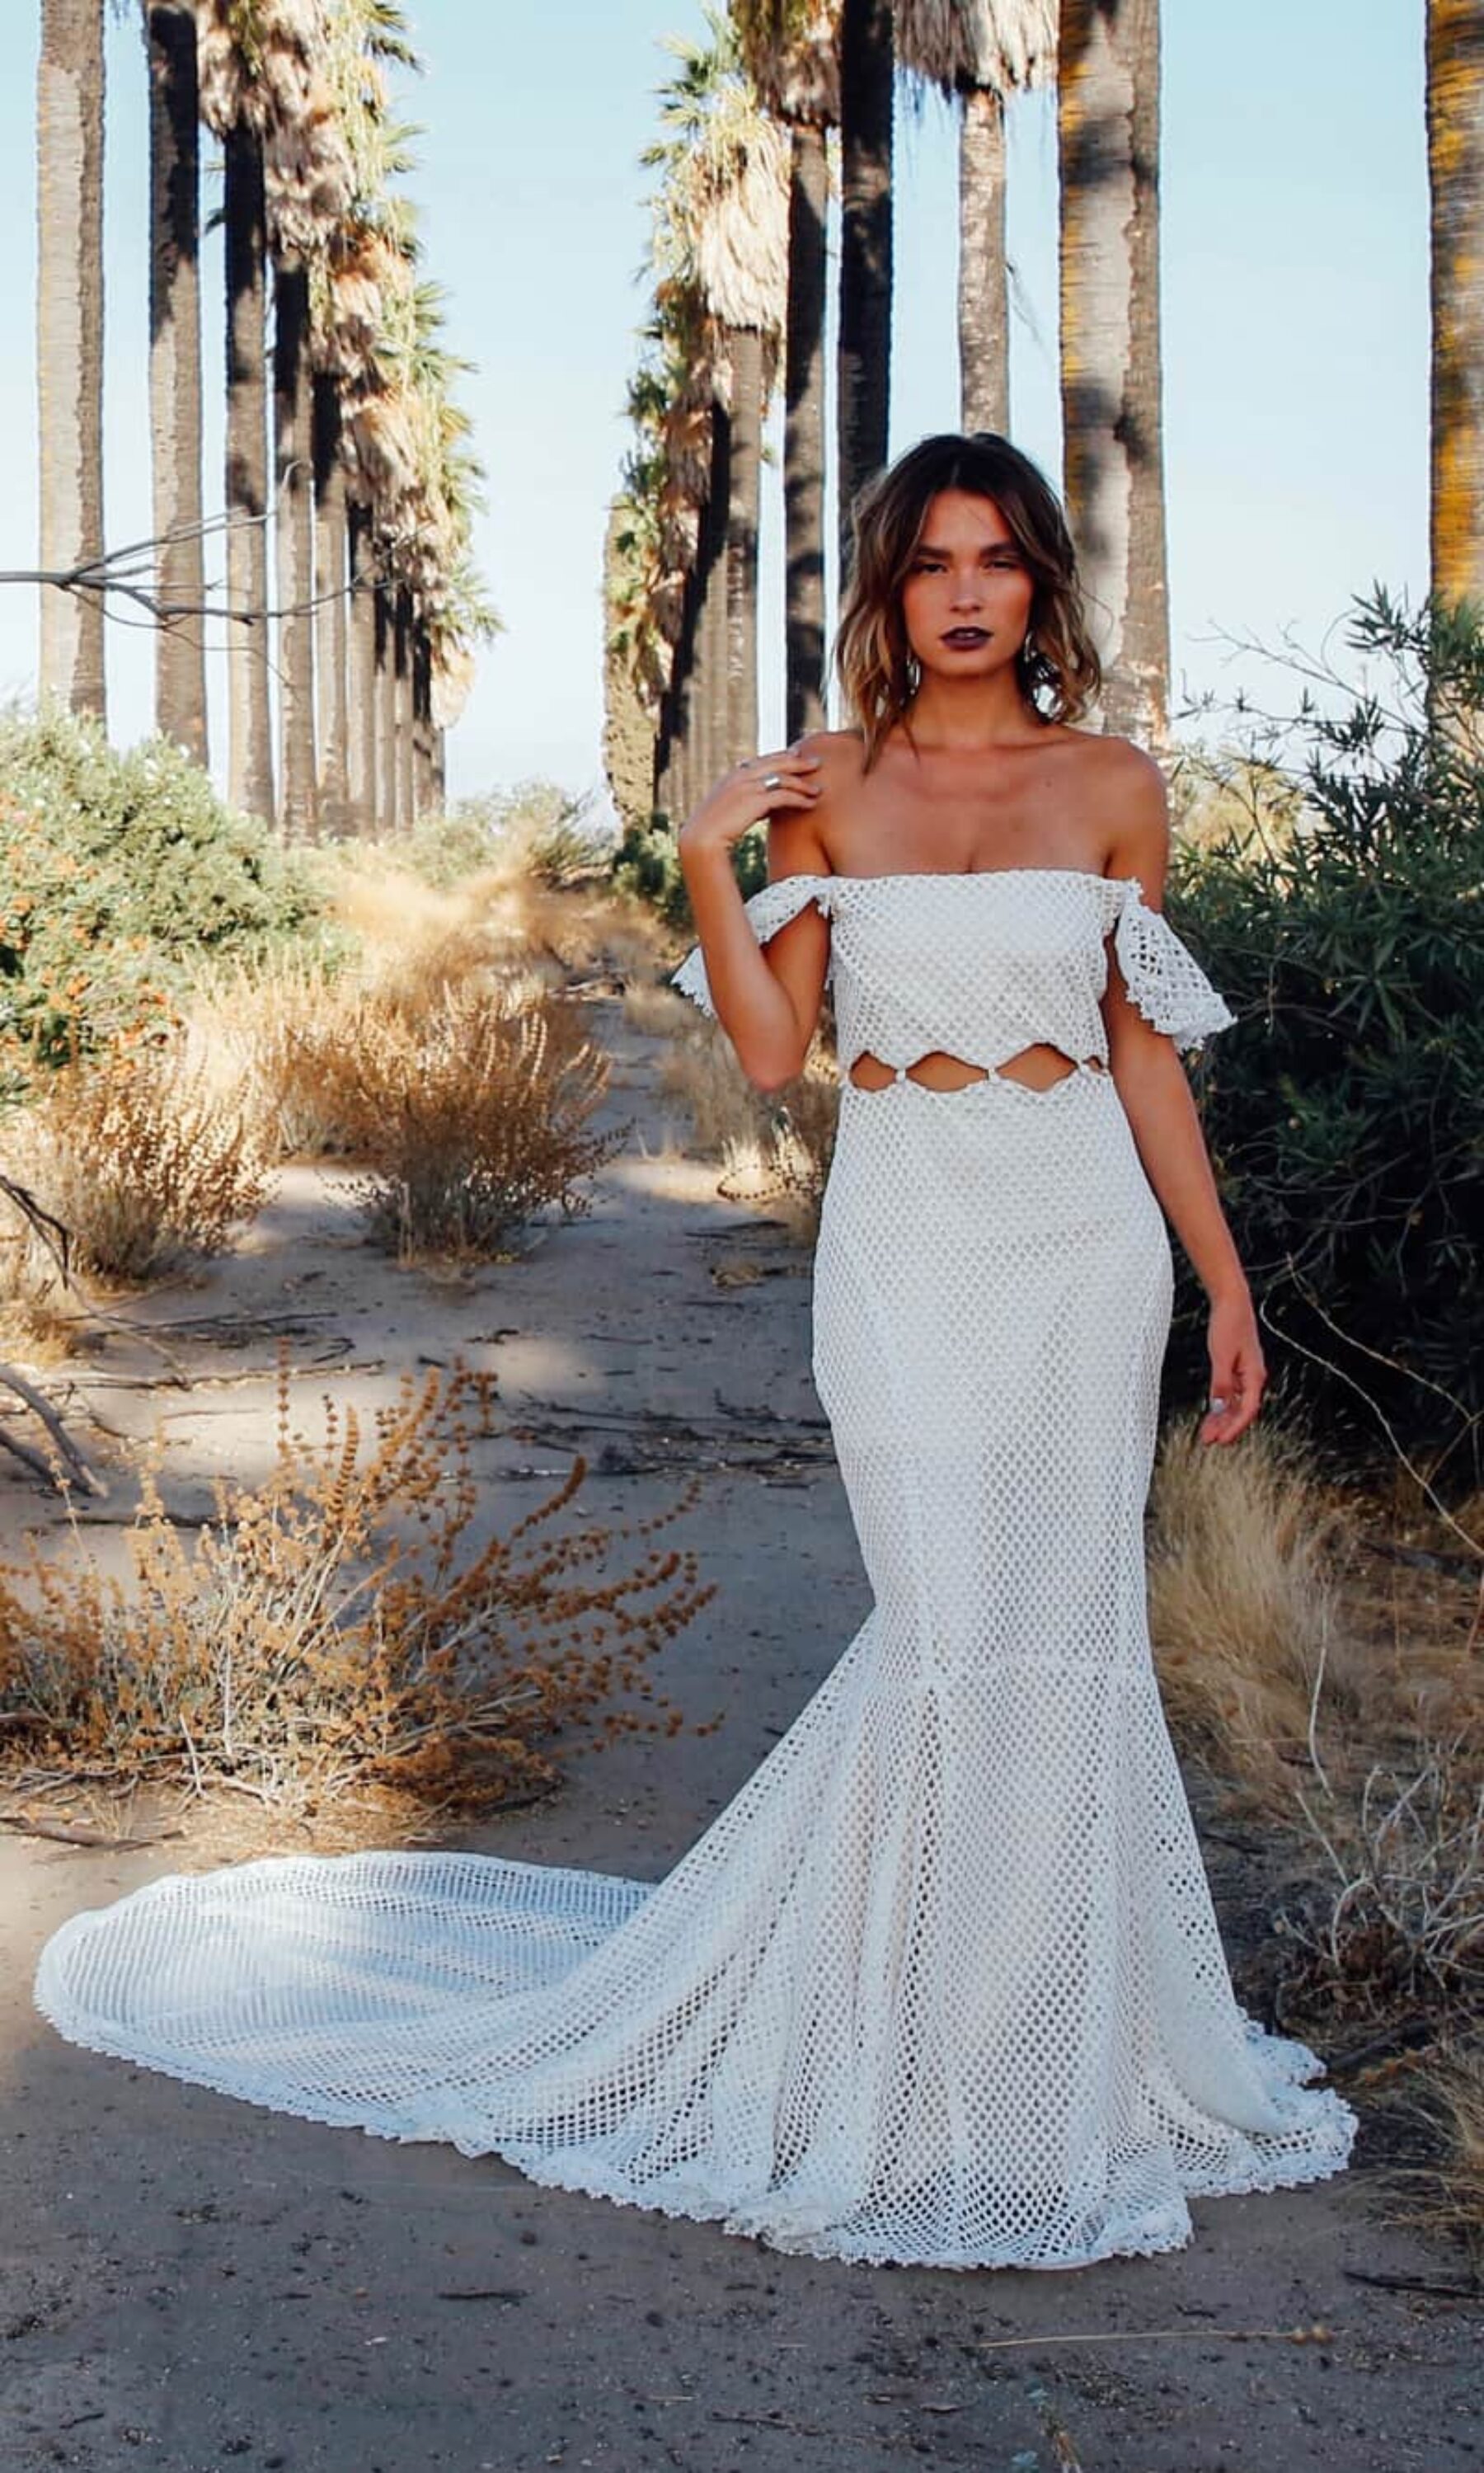 off-shoulder wedding dress by Daughters of Simone